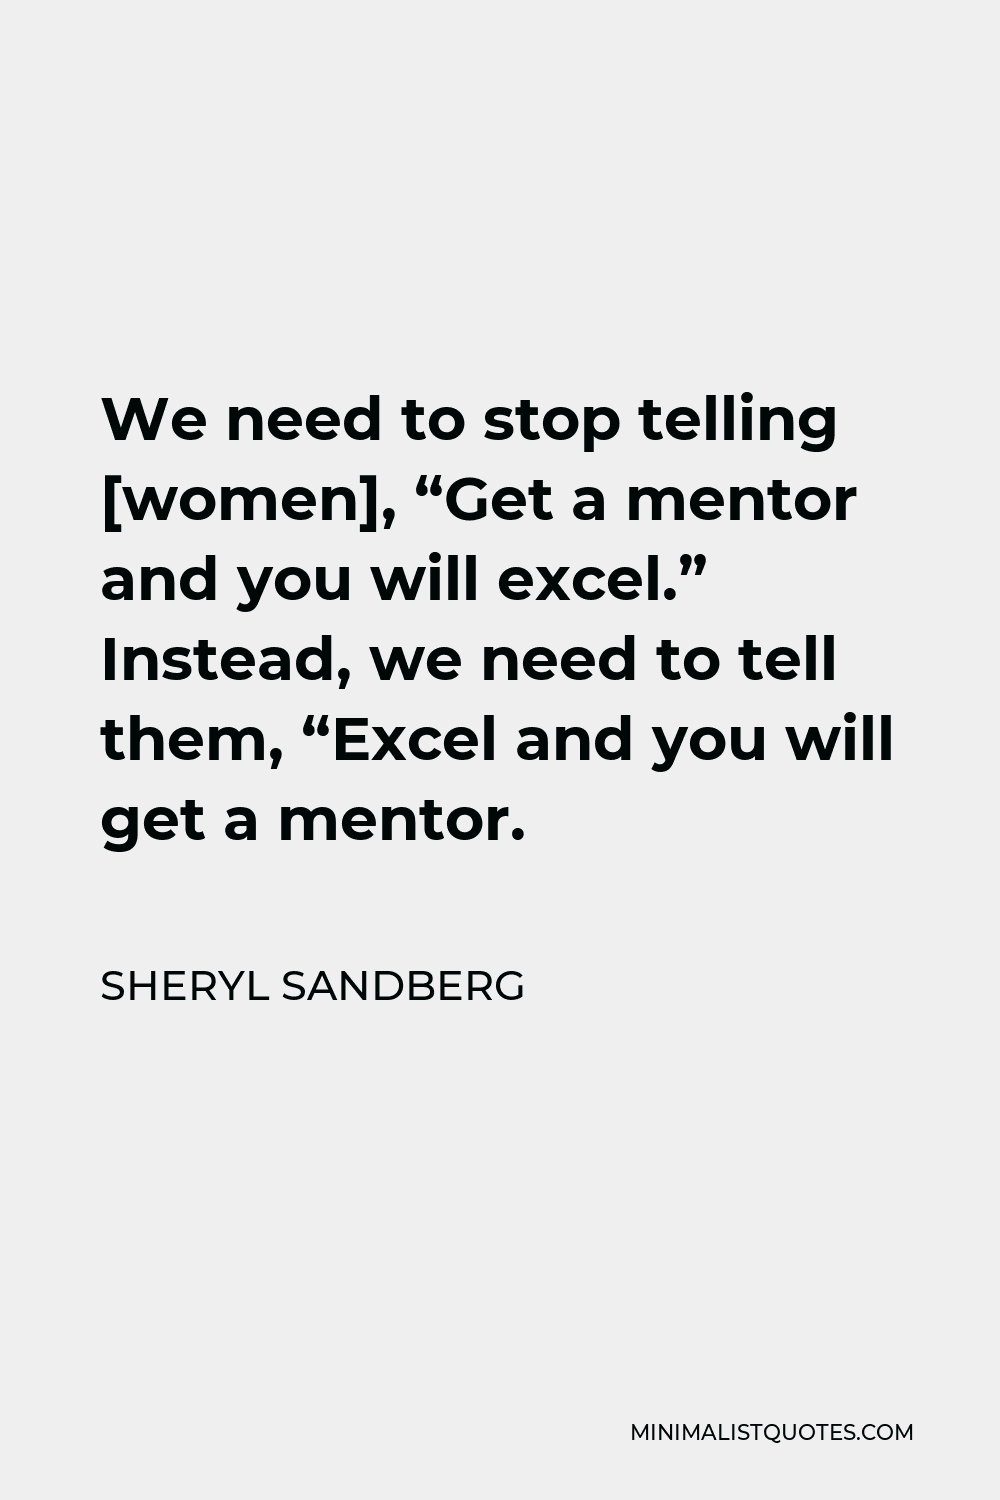 Sheryl Sandberg We need to stop telling "Get a mentor and you will excel." Instead, we need tell "Excel and you will get a mentor.